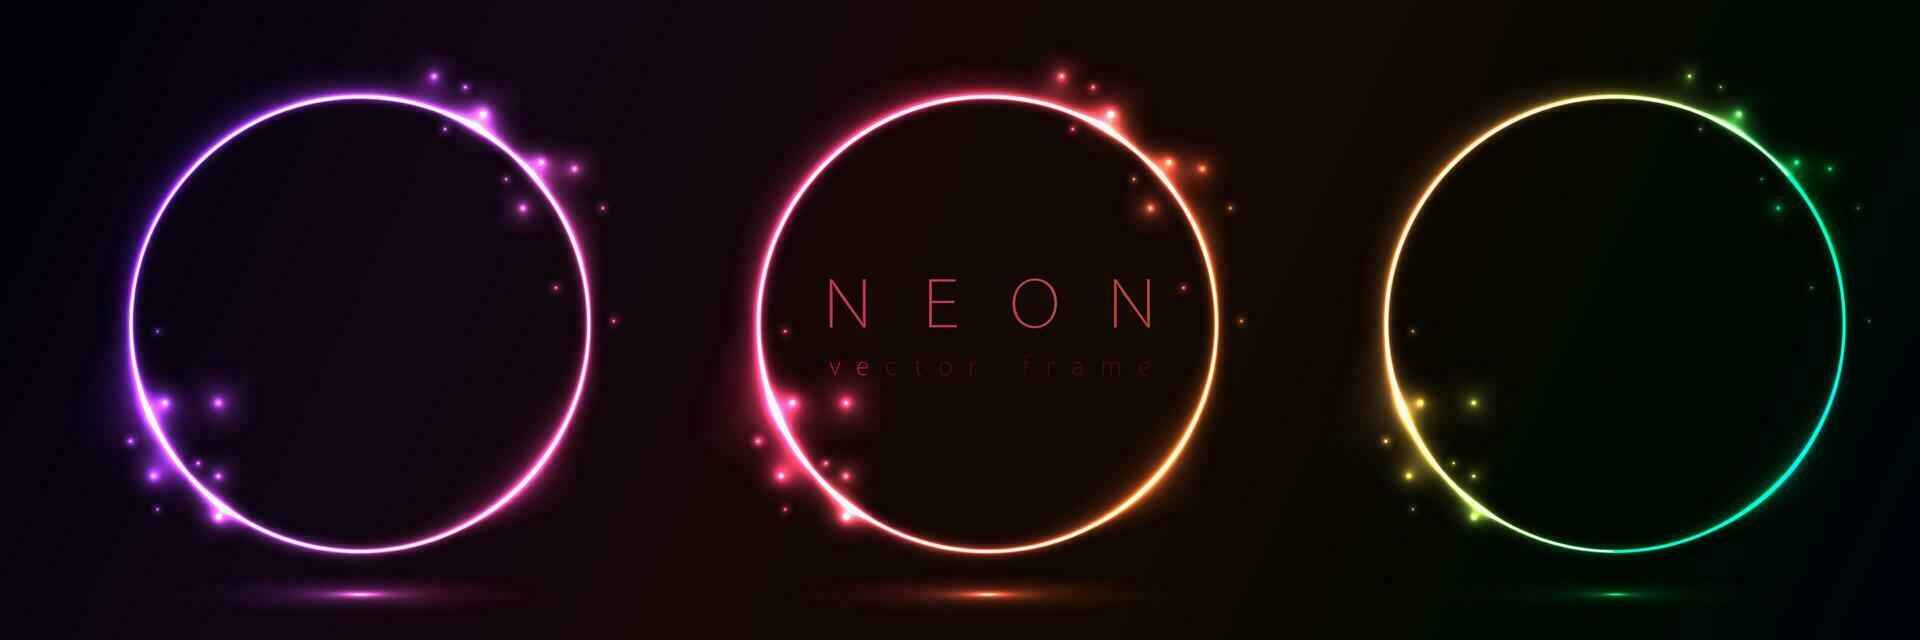 Set of glowing neon color circles round curve shape with wavy dynamic lines isolated on black background technology concept. Circular light frame border for badges, price tag, label cards, logo design vector